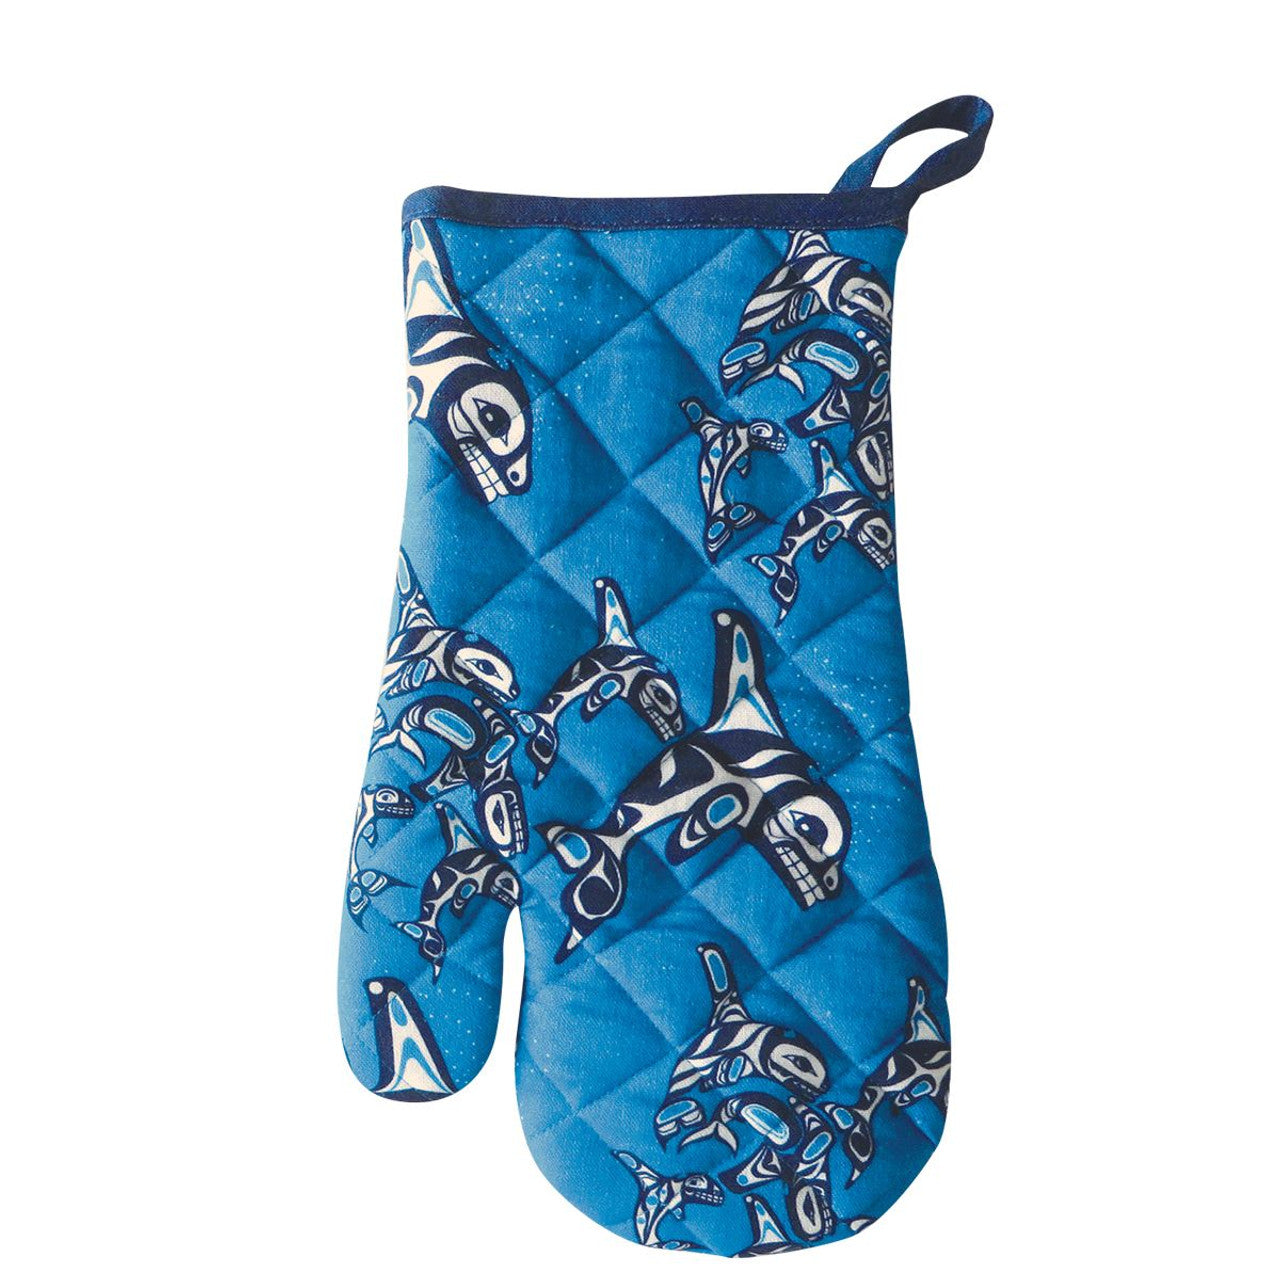 COTTON OVEN MITTS - Orca Family - KO103 - House of Himwitsa Native Art Gallery and Gifts